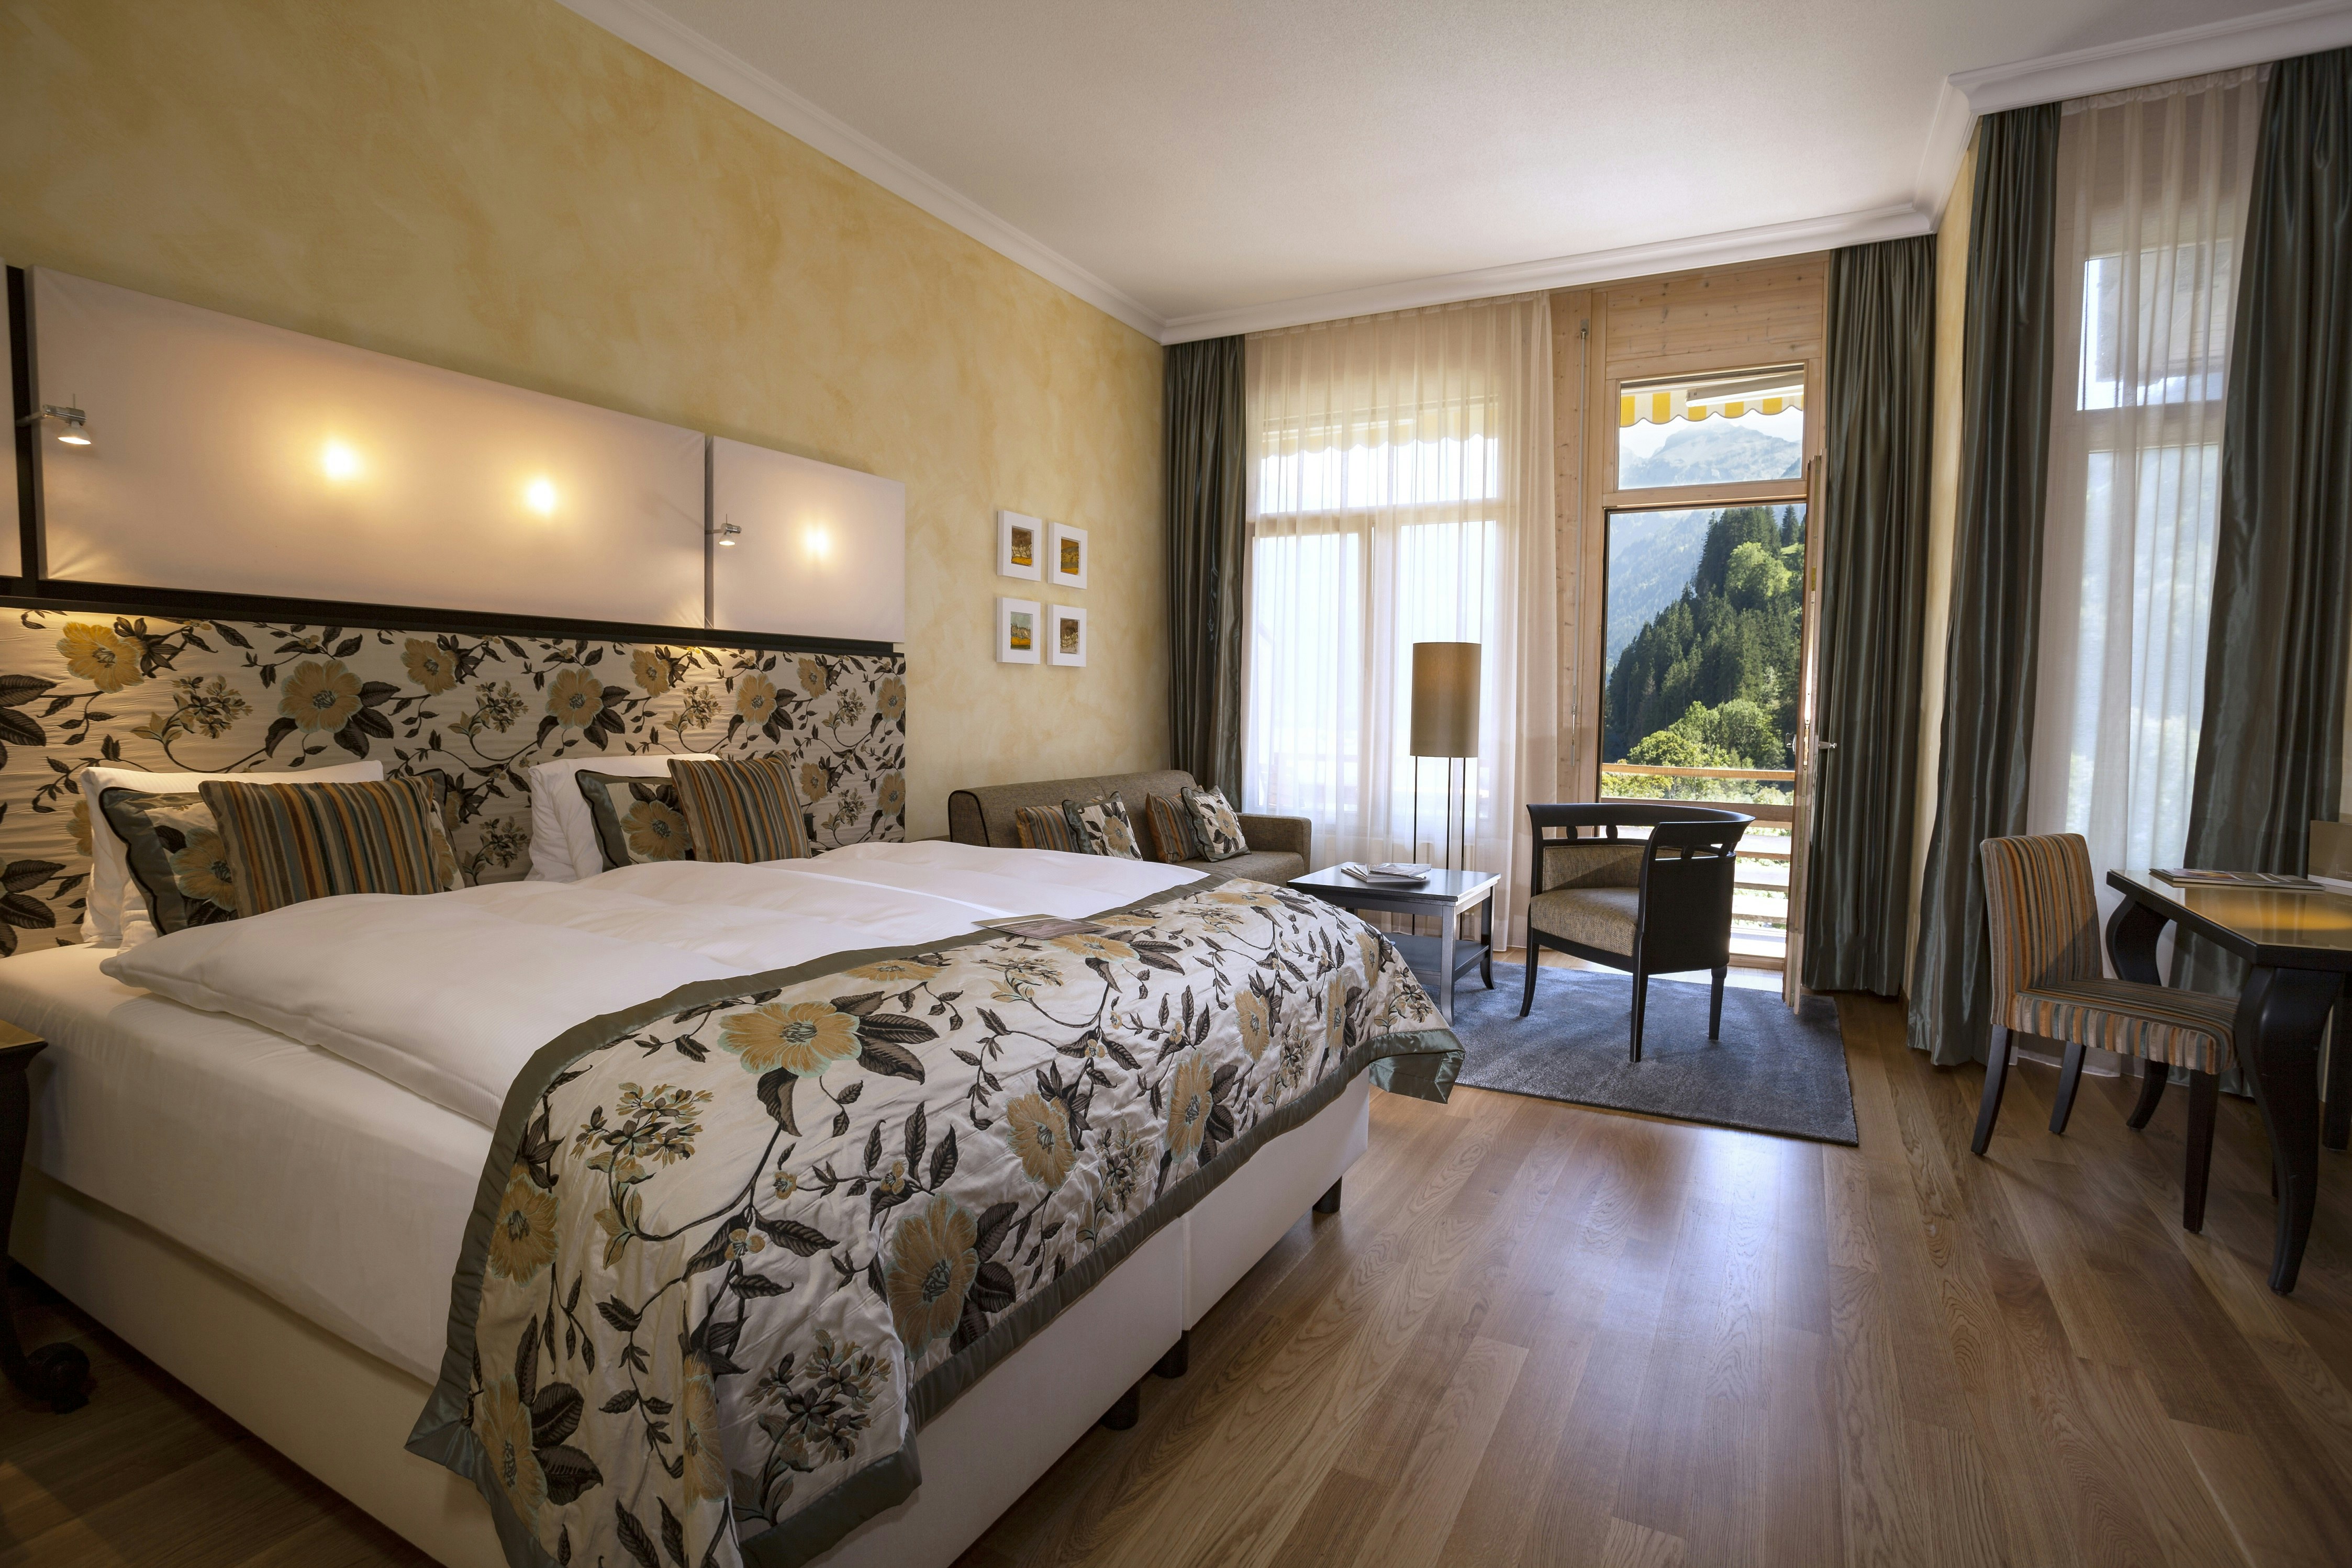 Rooms of your dreams at the Lenkerhof